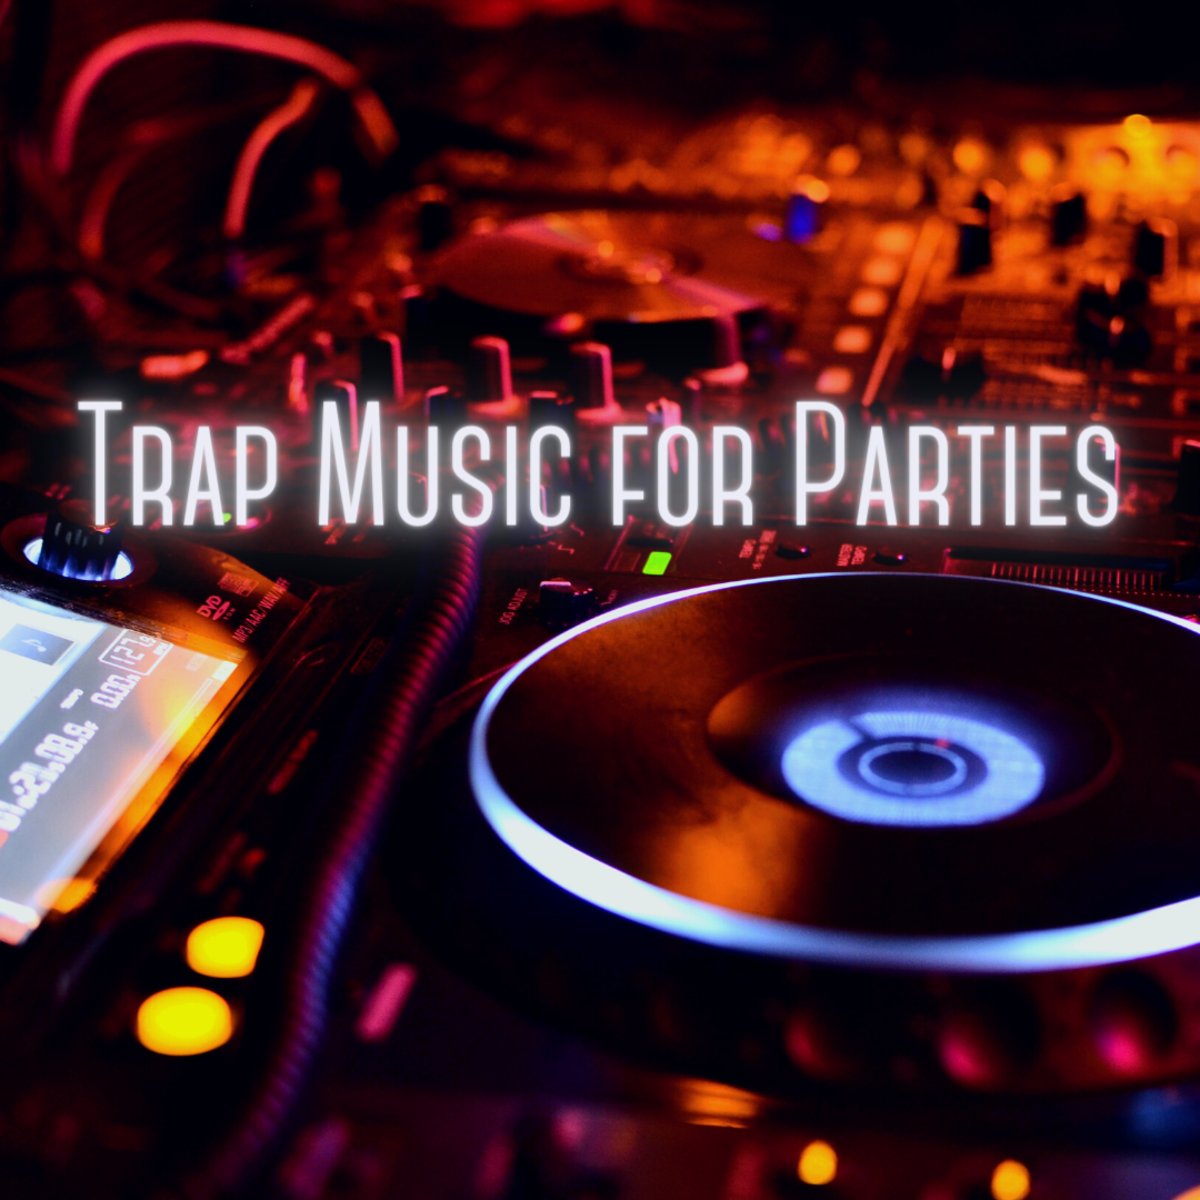 What are the best trap songs to play at parties? Read on to find out!